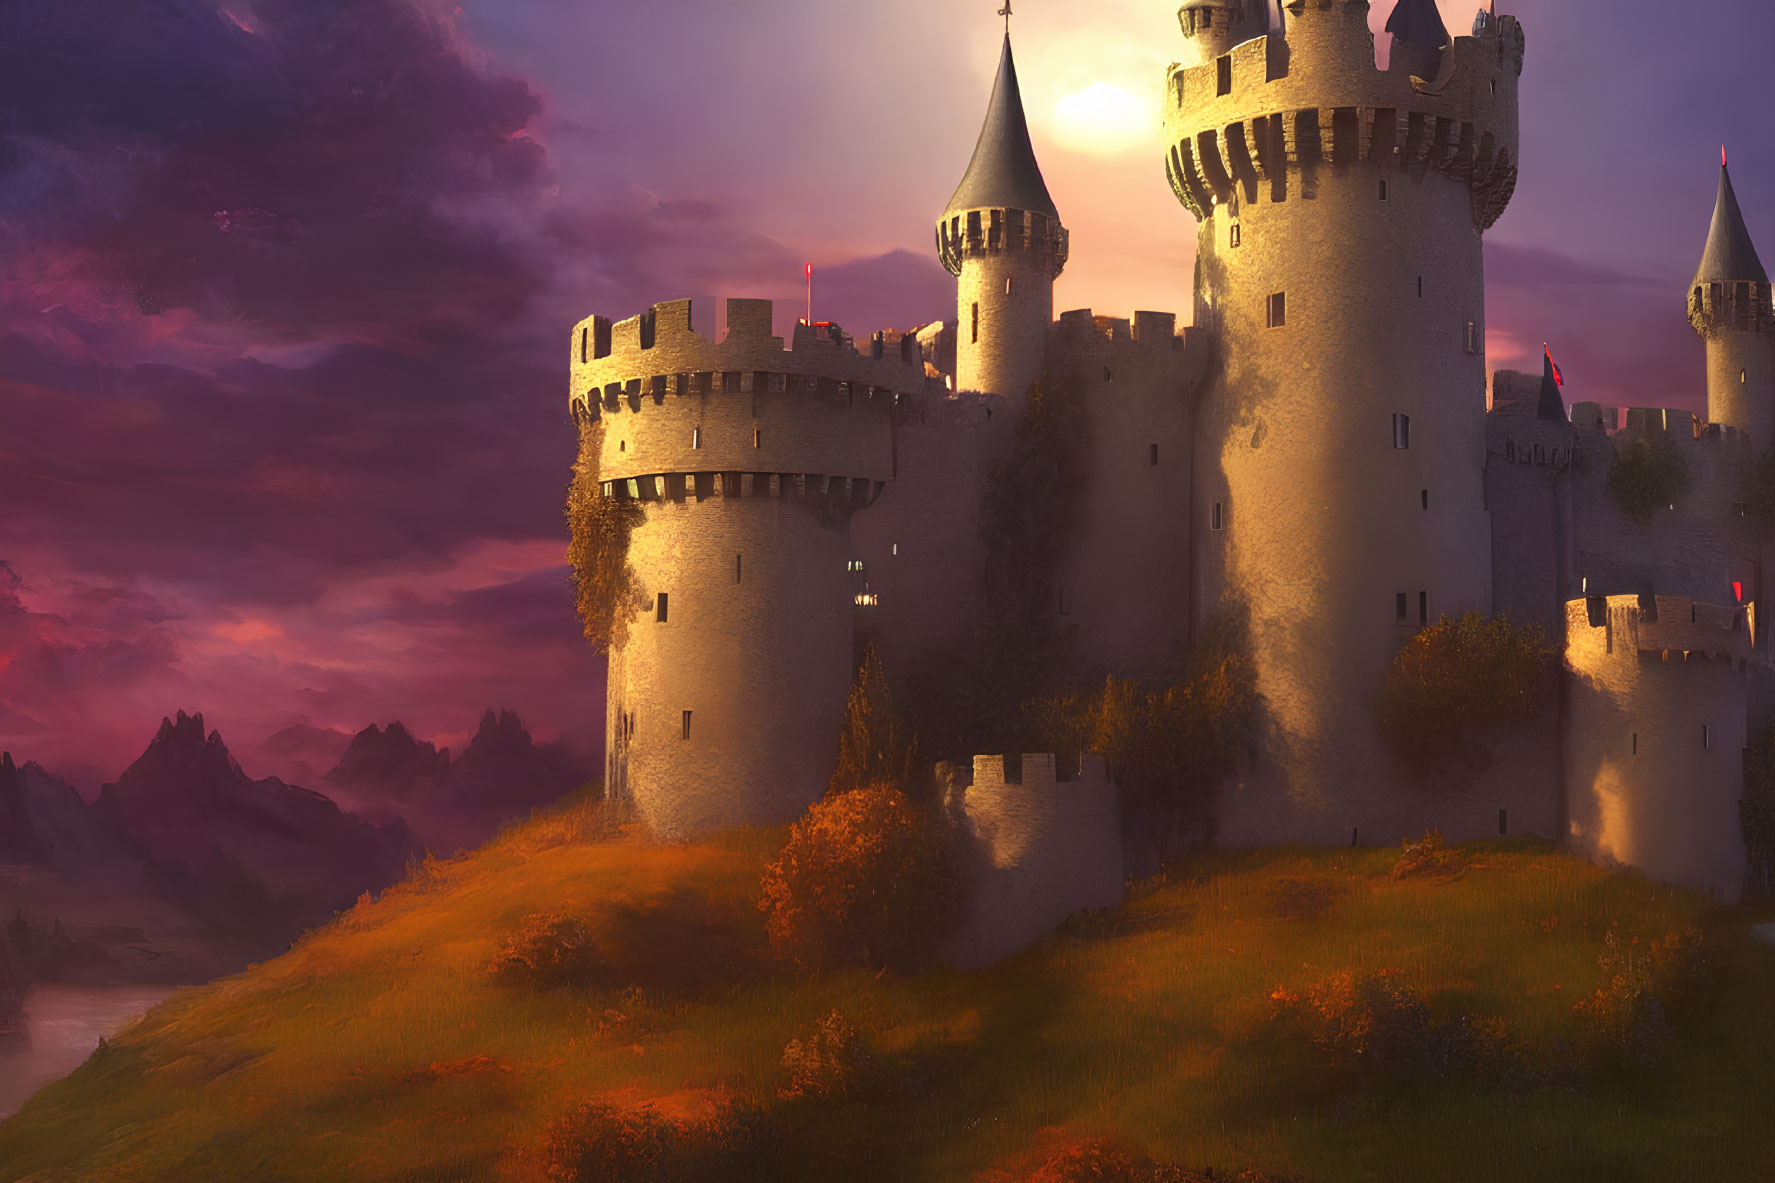 Sunset view of majestic castle with radiant skies and lush landscape